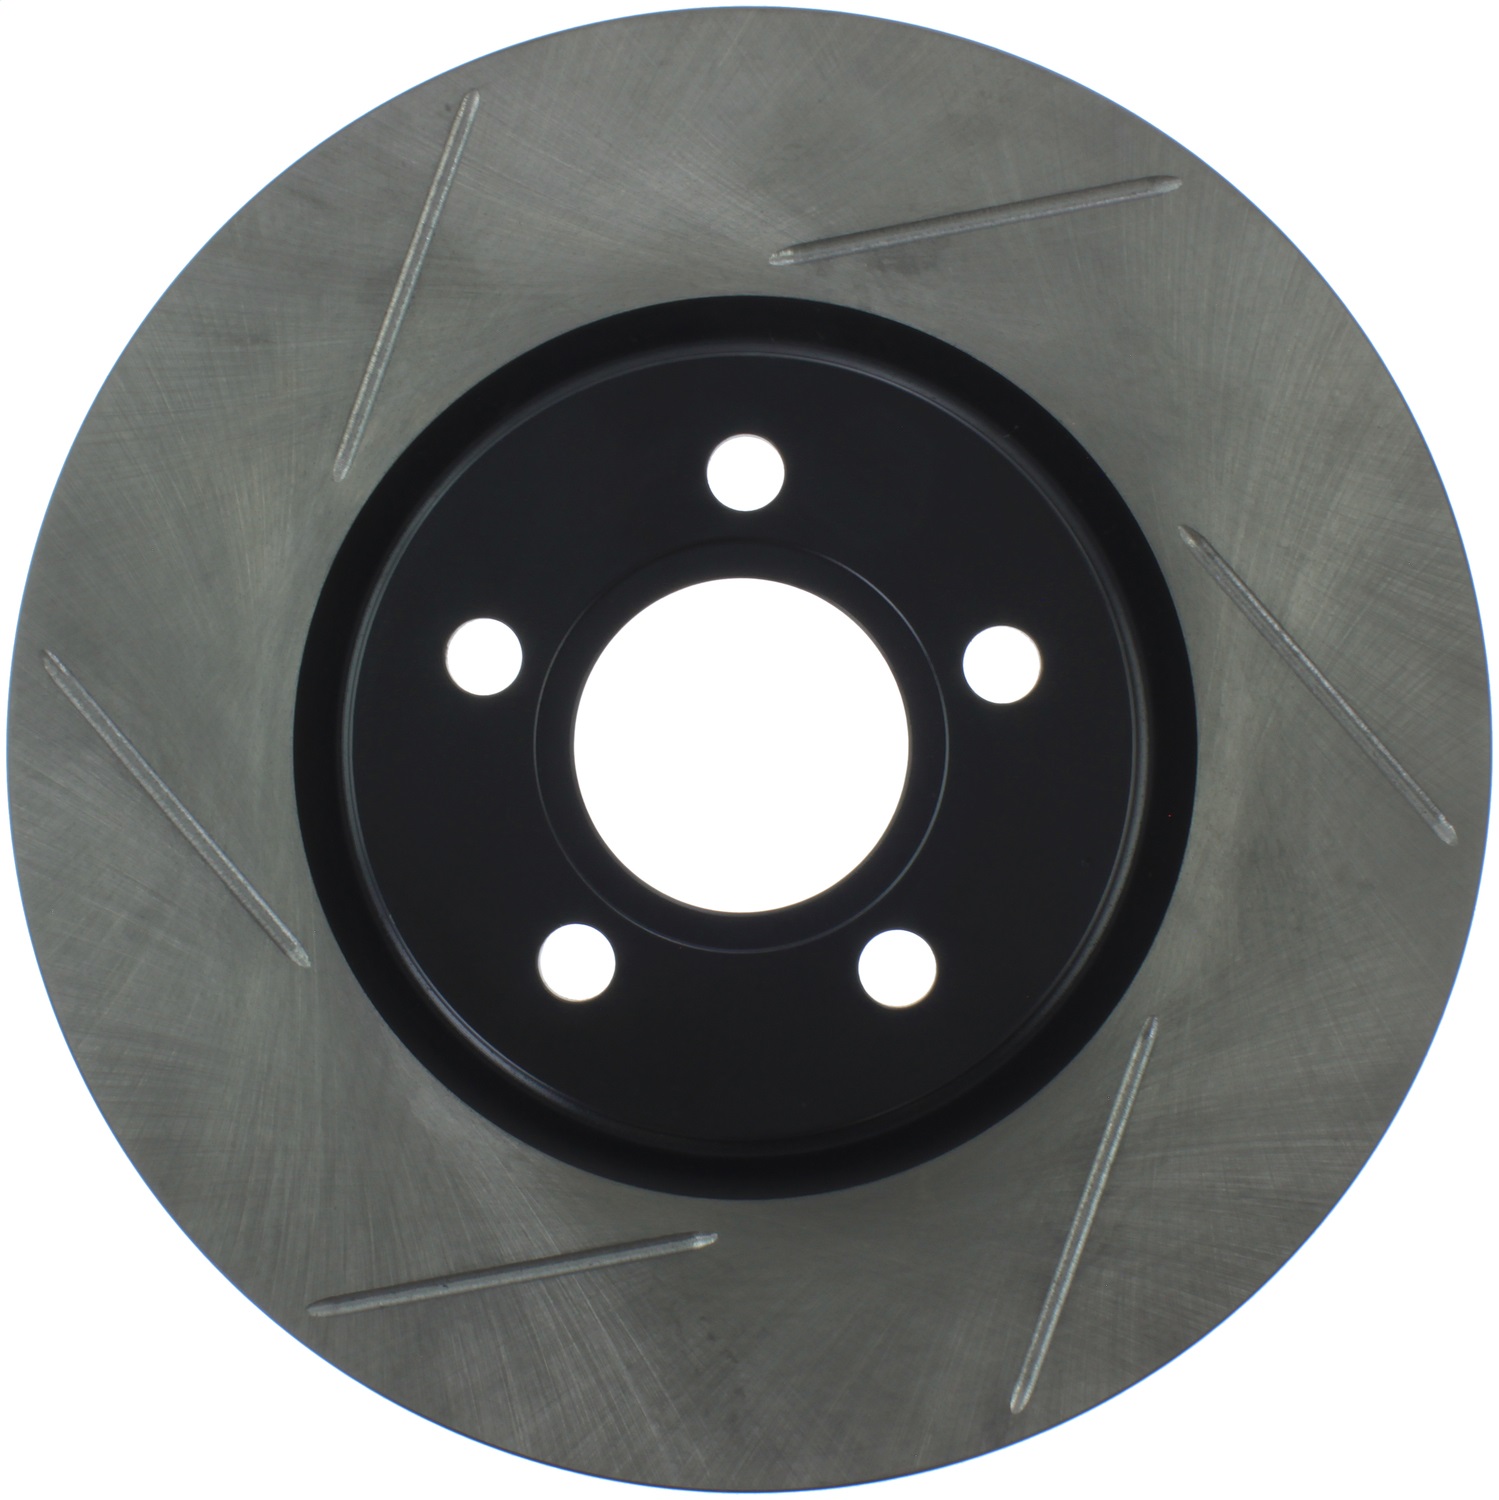 StopTech 126.63053SR Sport Slotted Disc Brake Rotor Fits 03-09 Neon PT Cruiser